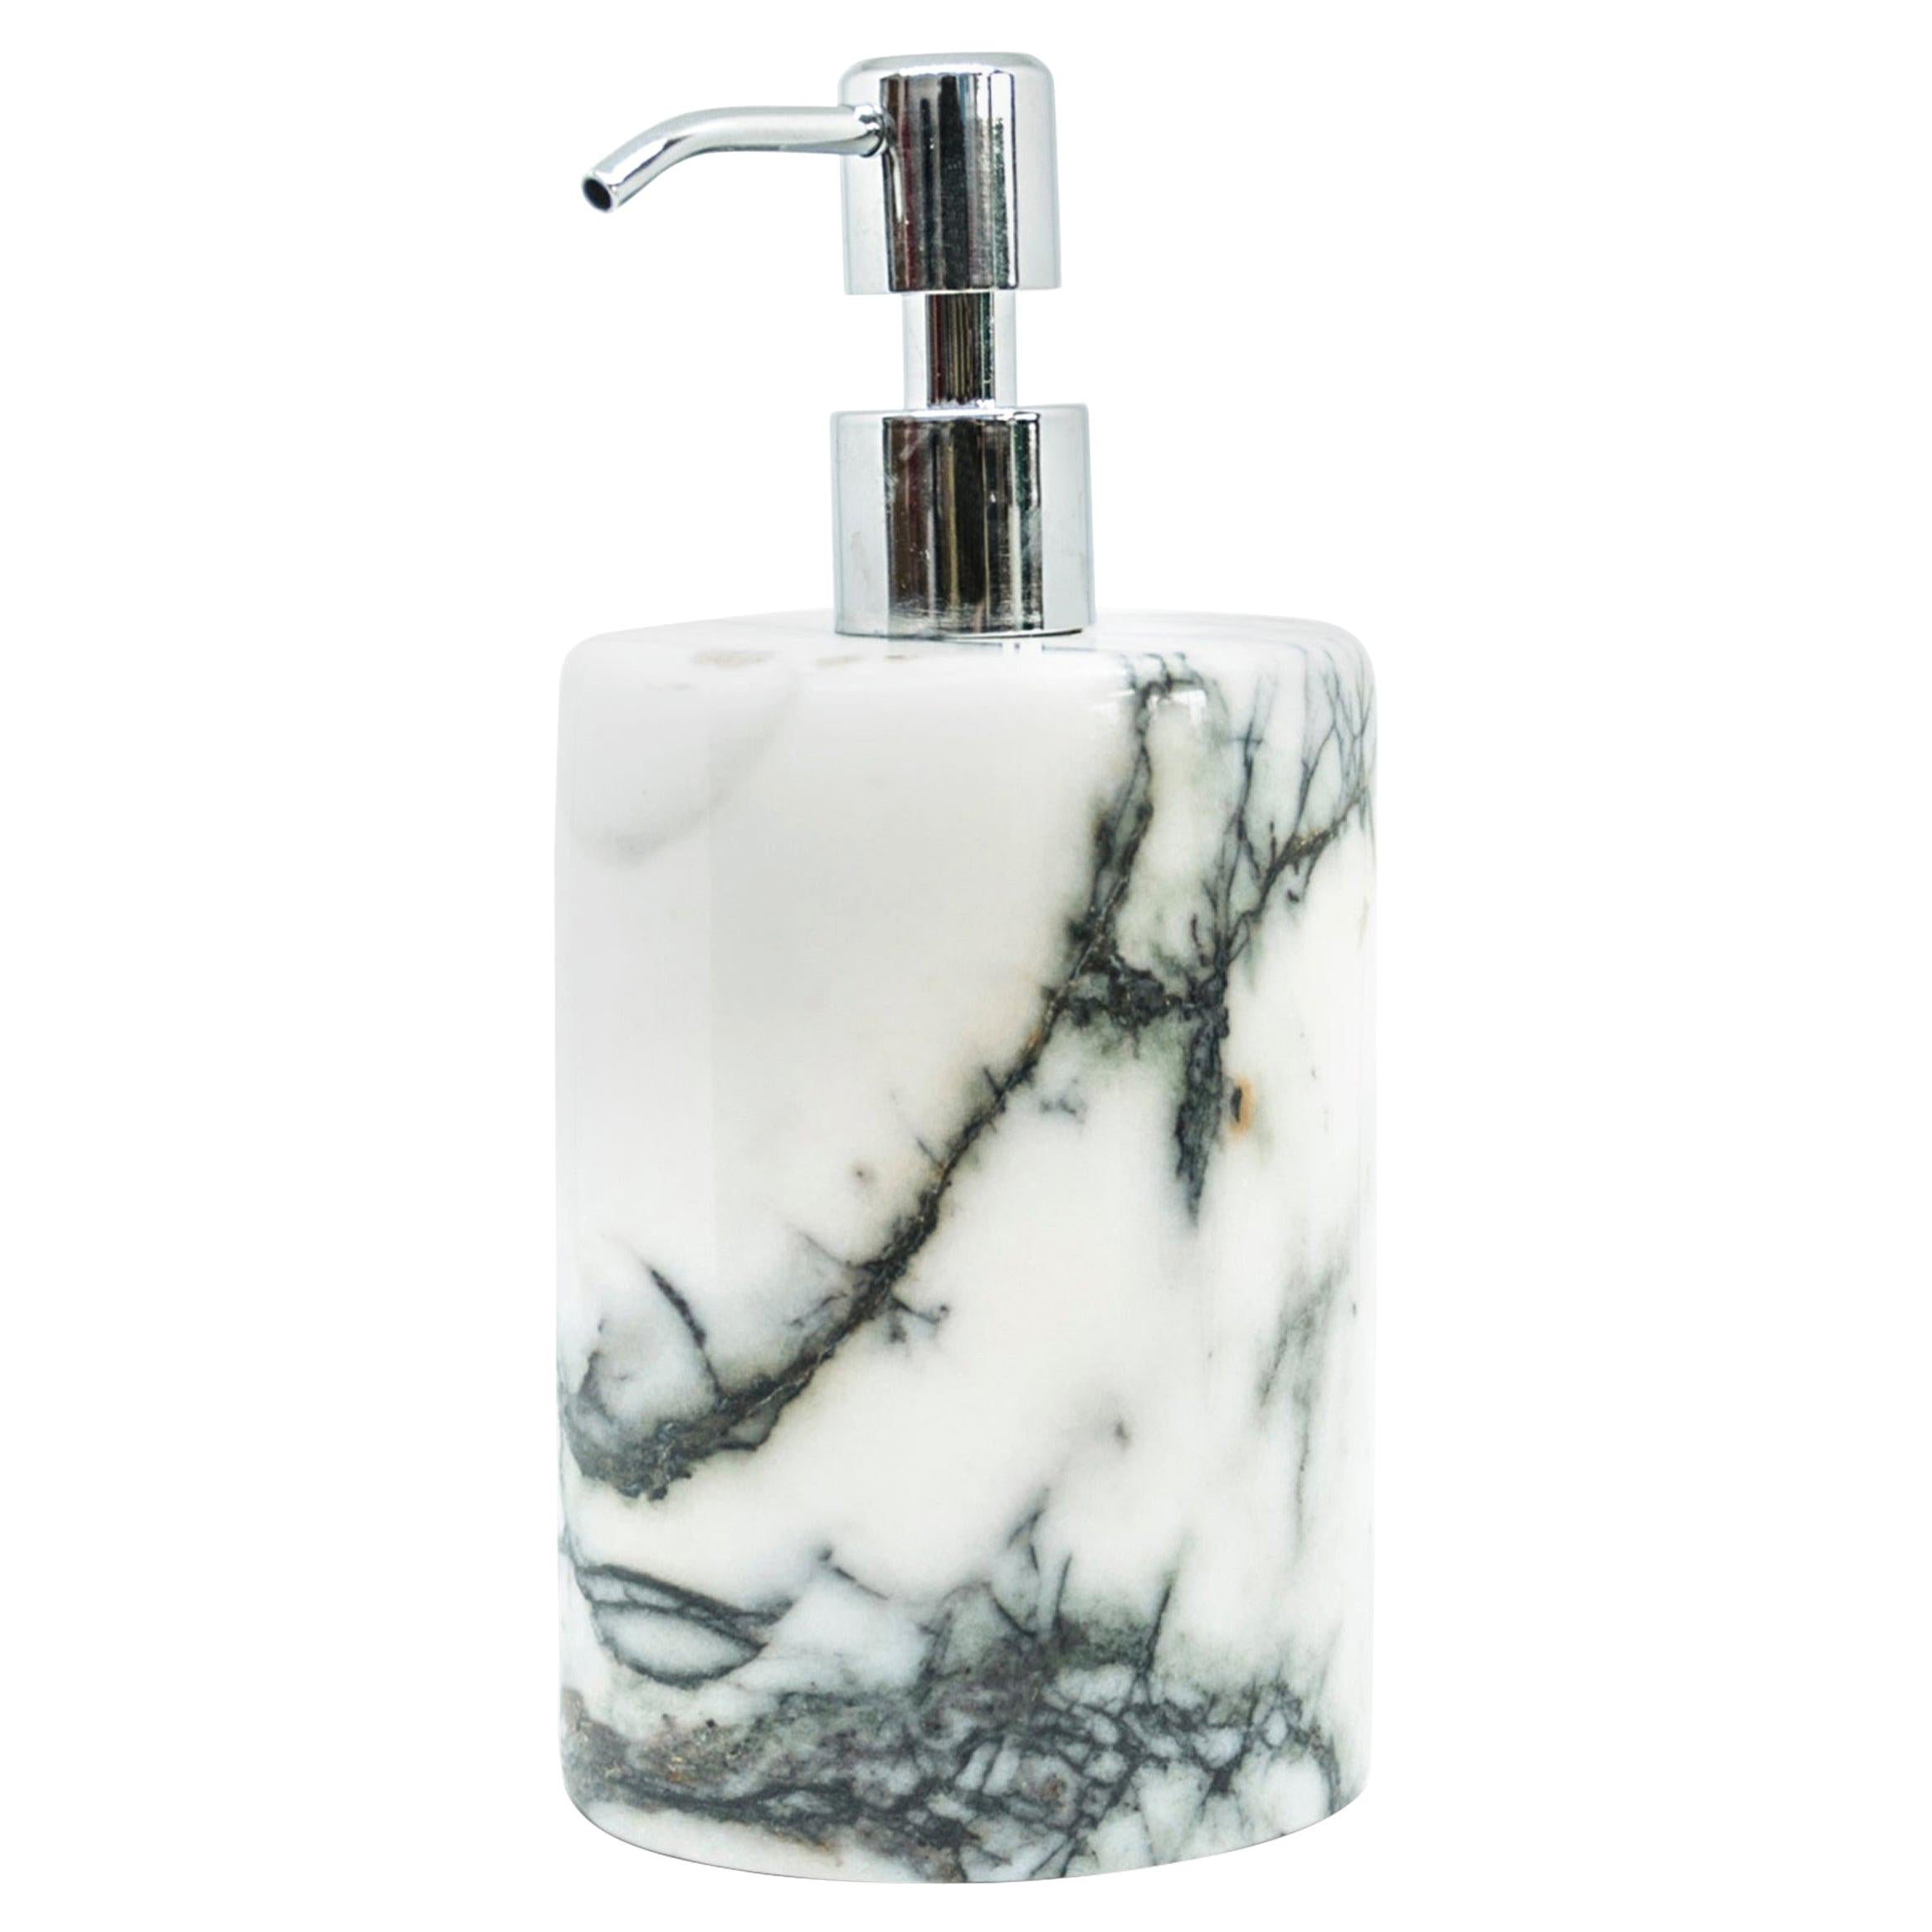 Handmade Rounded Soap Dispenser in Paonazzo Marble